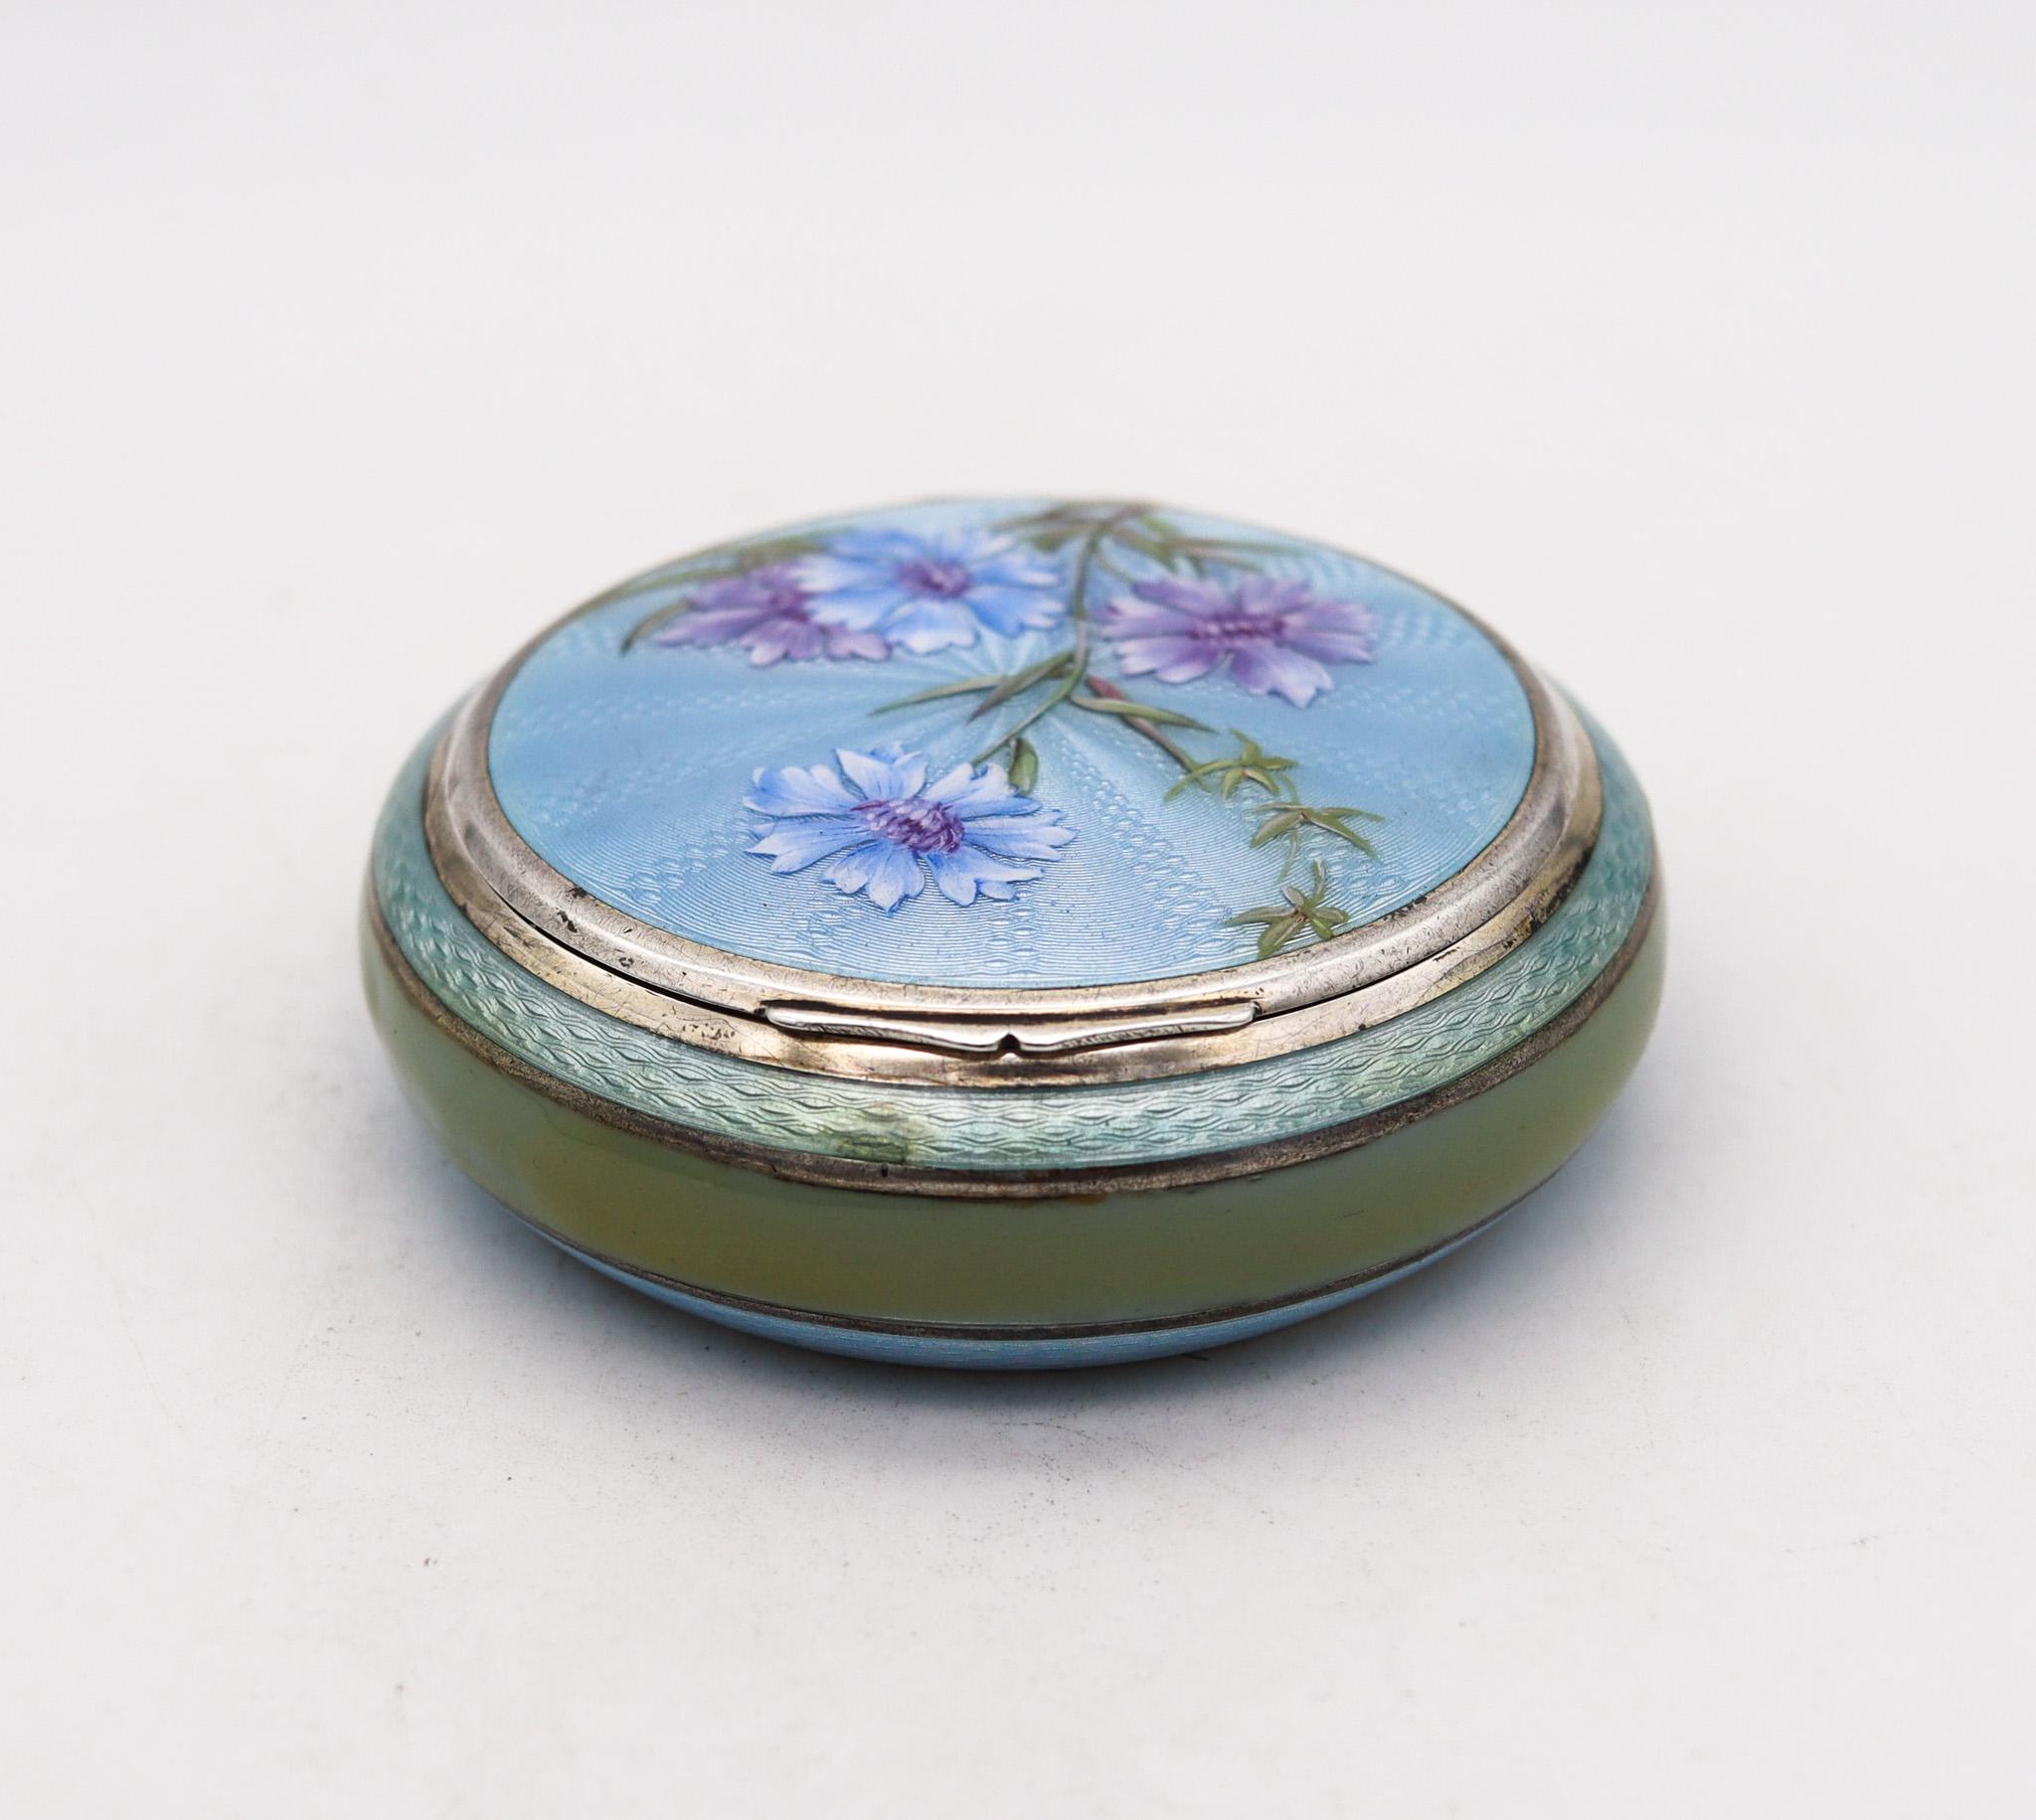 A guilloche enameled round box.

An exceptional early 20th century enameled round box, created in Pforzheim Germany during the art nouveau period, back in the 1915-17. This beautiful box was carefully crafted with impeccable details in solid